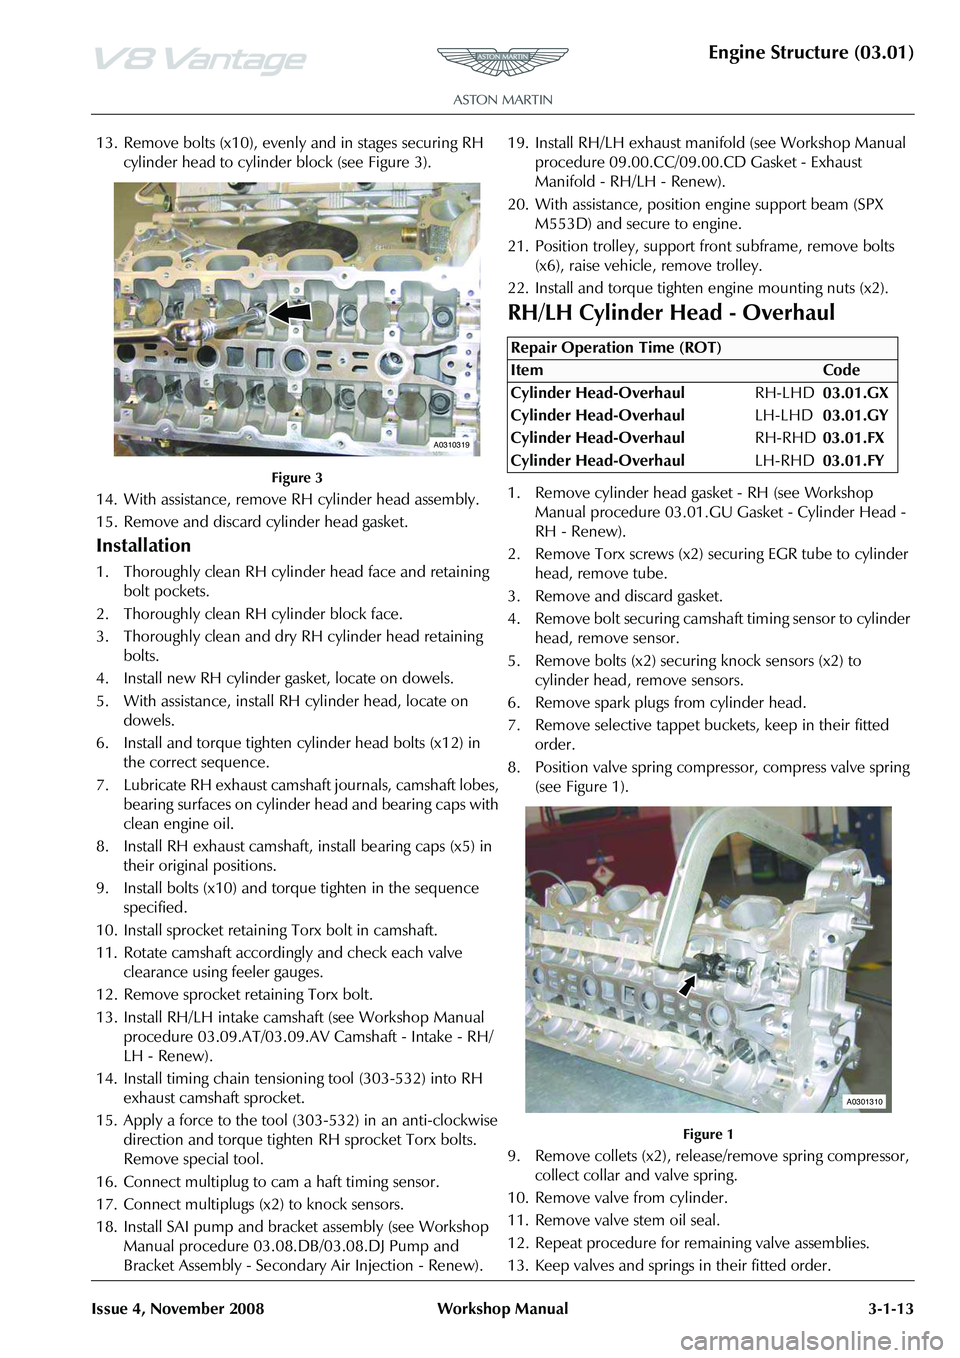 ASTON MARTIN V8 VANTAGE 2010  Workshop Manual Engine Structure (03.01)
Issue 4, November 2008Workshop Manual 3-1-13
13. Remove bolts (x10), evenly and in stages securing RH 
cylinder head to cylinder block (see Figure 3).   
Figure 3
14. With ass